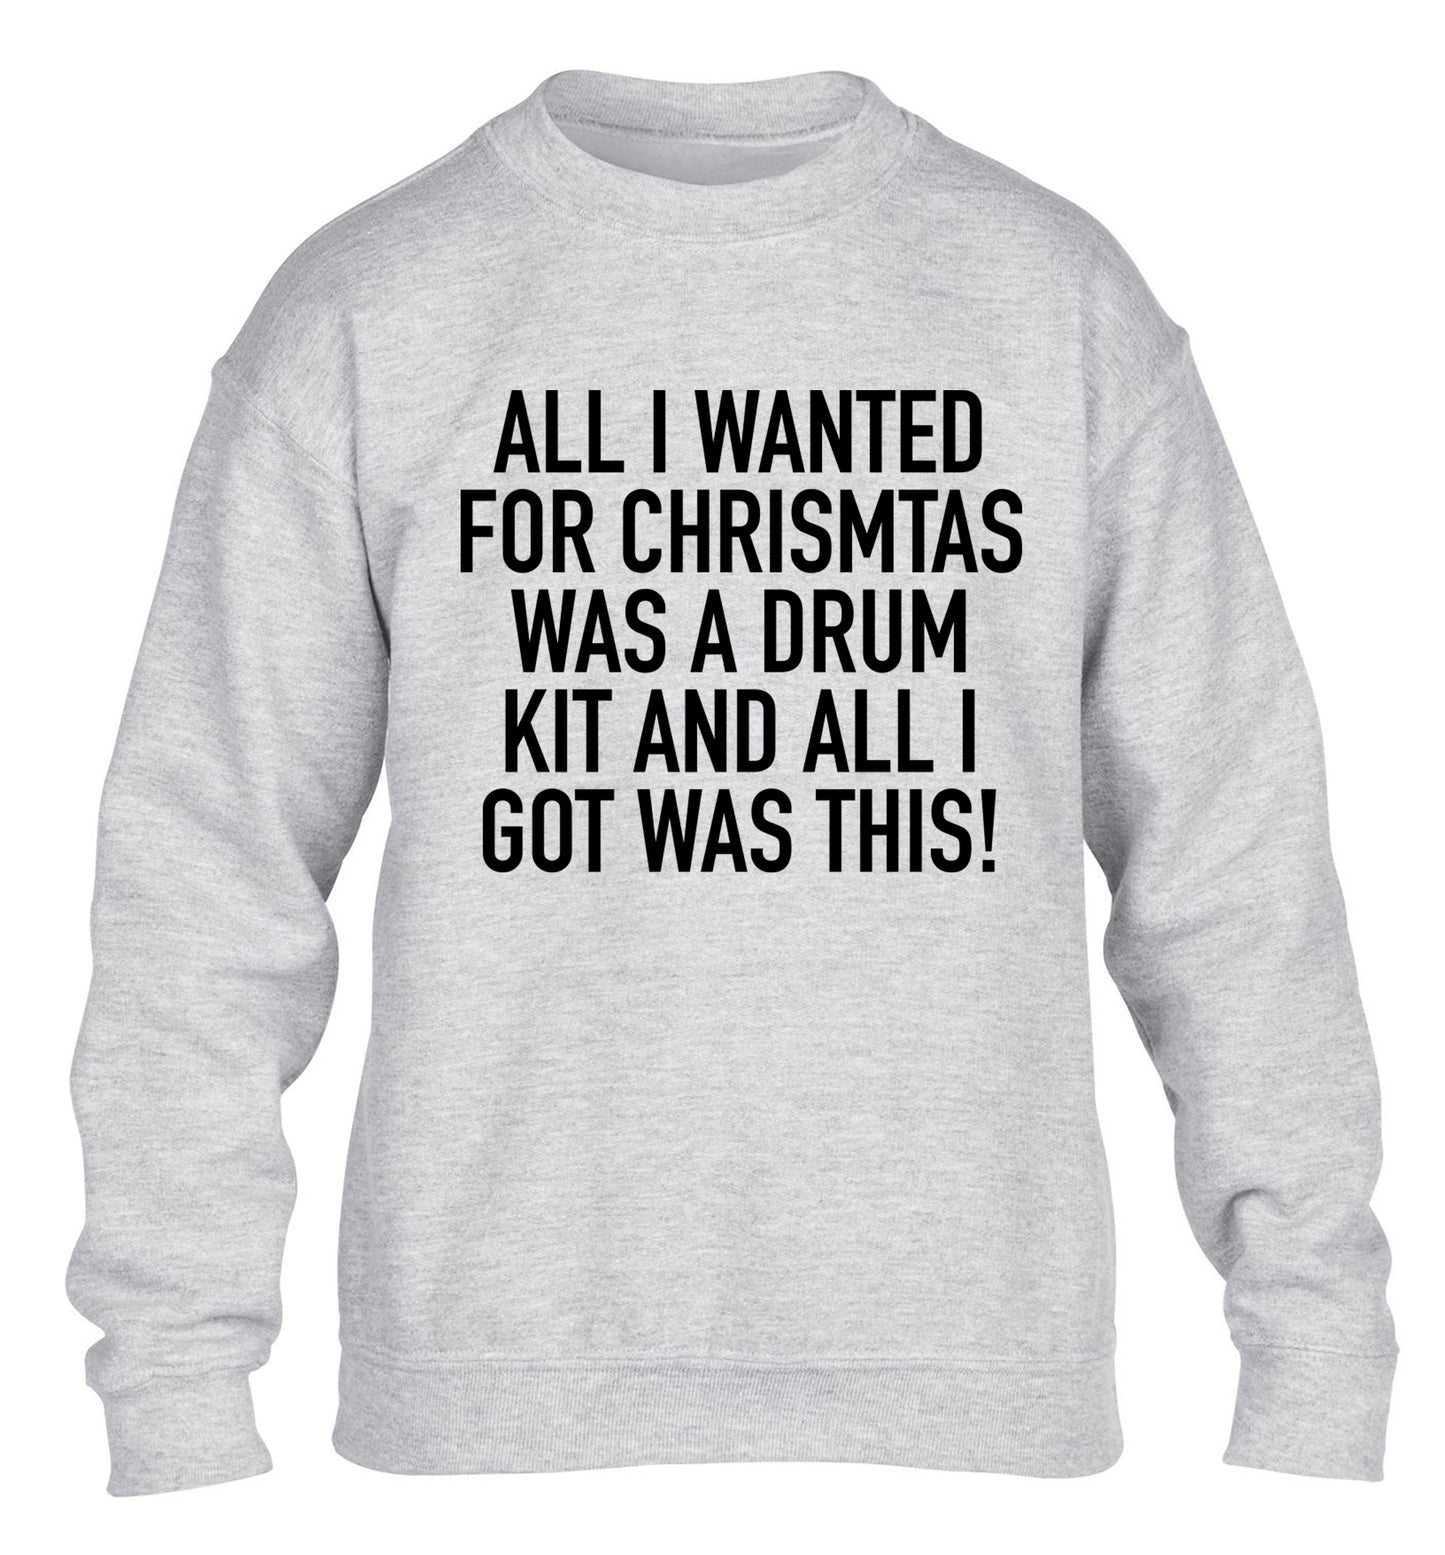 All I wanted for Christmas was a drum kit and all I got was this! children's grey sweater 12-14 Years